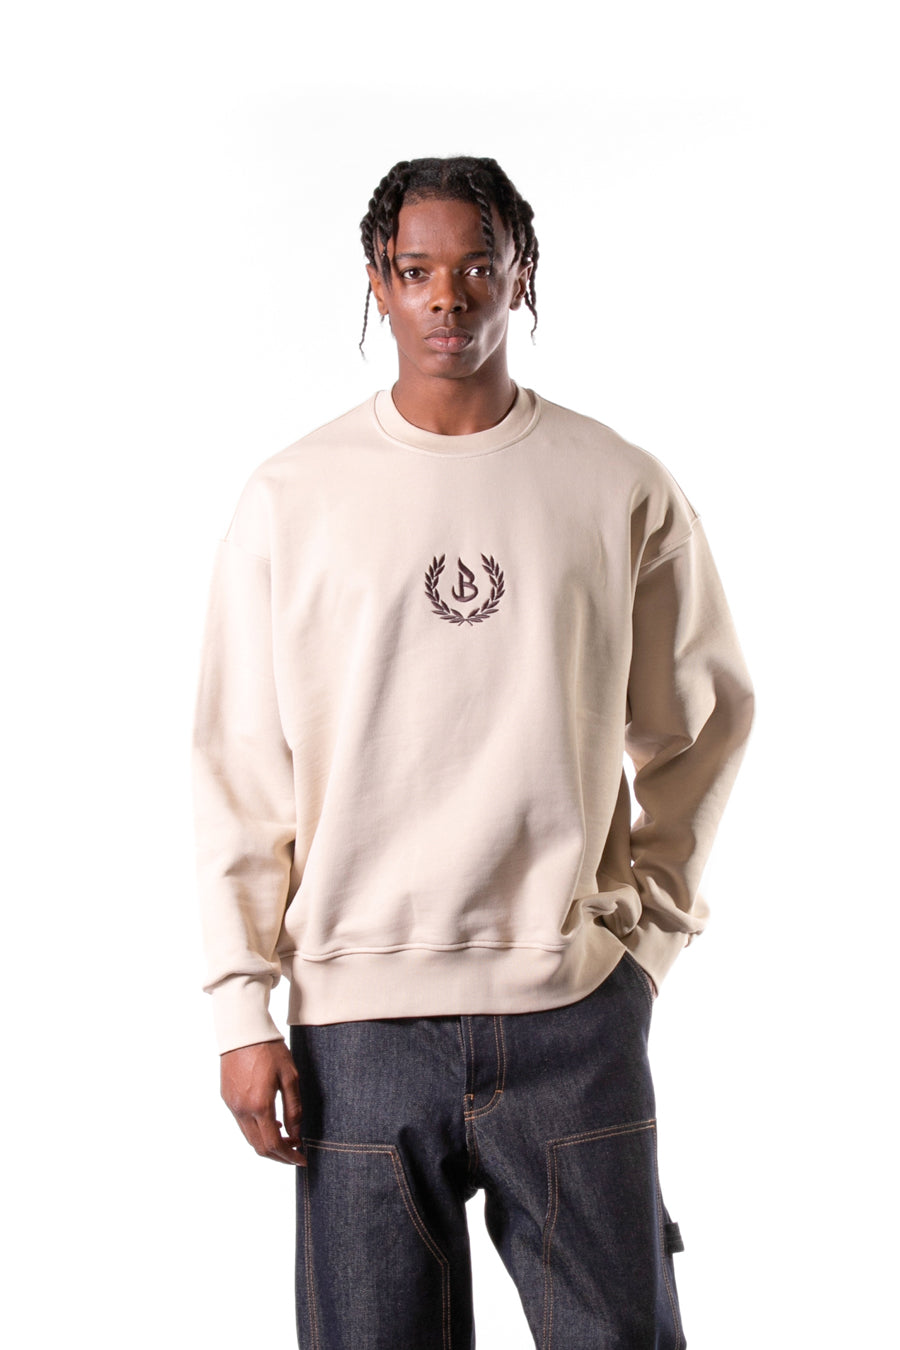 Oversized crewneck sweatshirt in 370g heavy cotton with embroidery - Beige